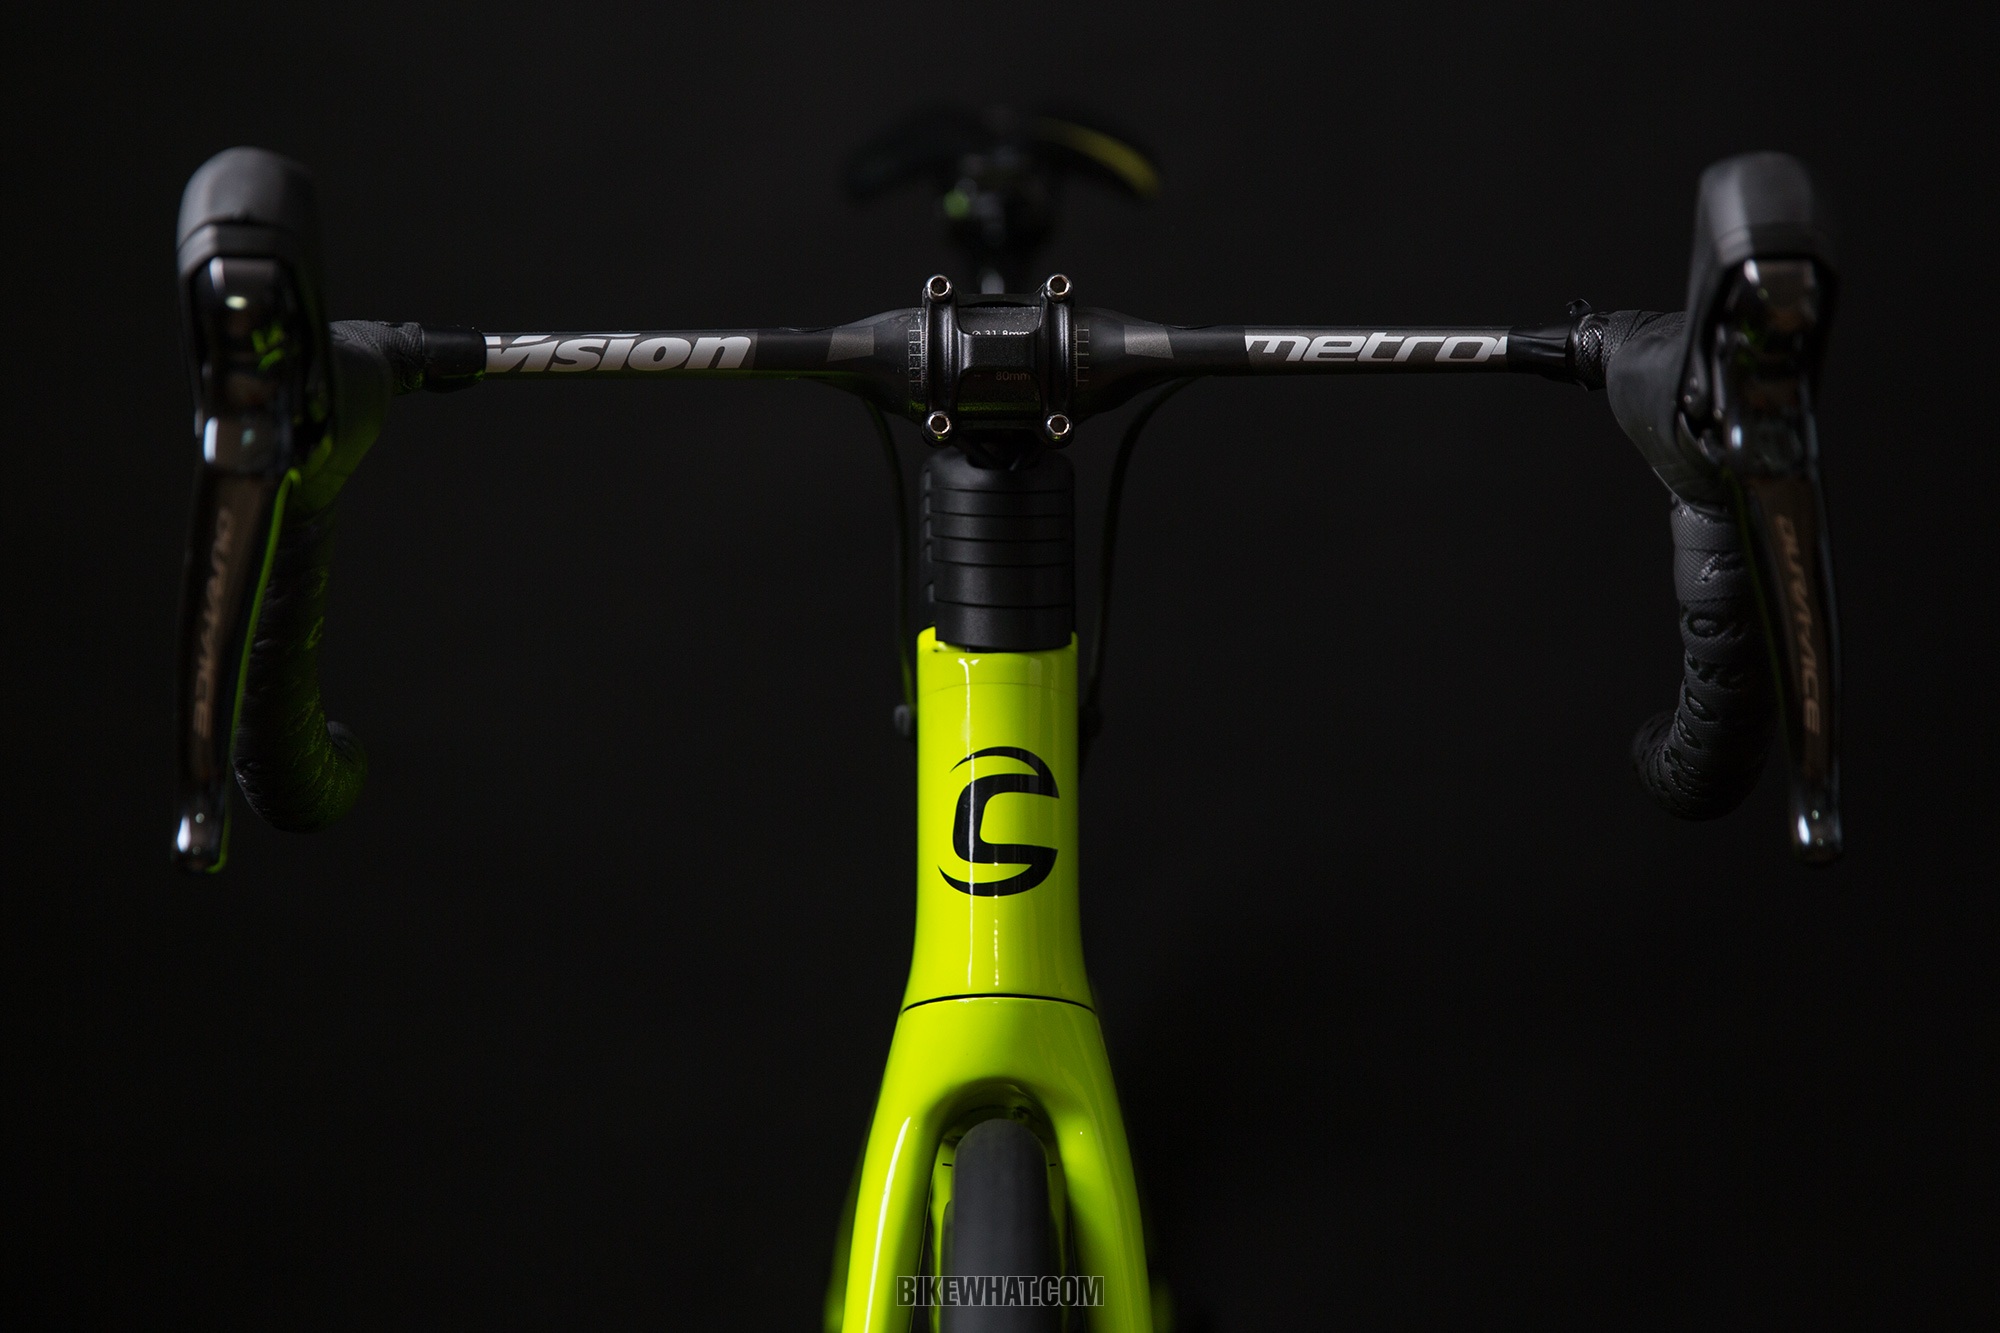 testride_cannondale_systemsix_04.jpg